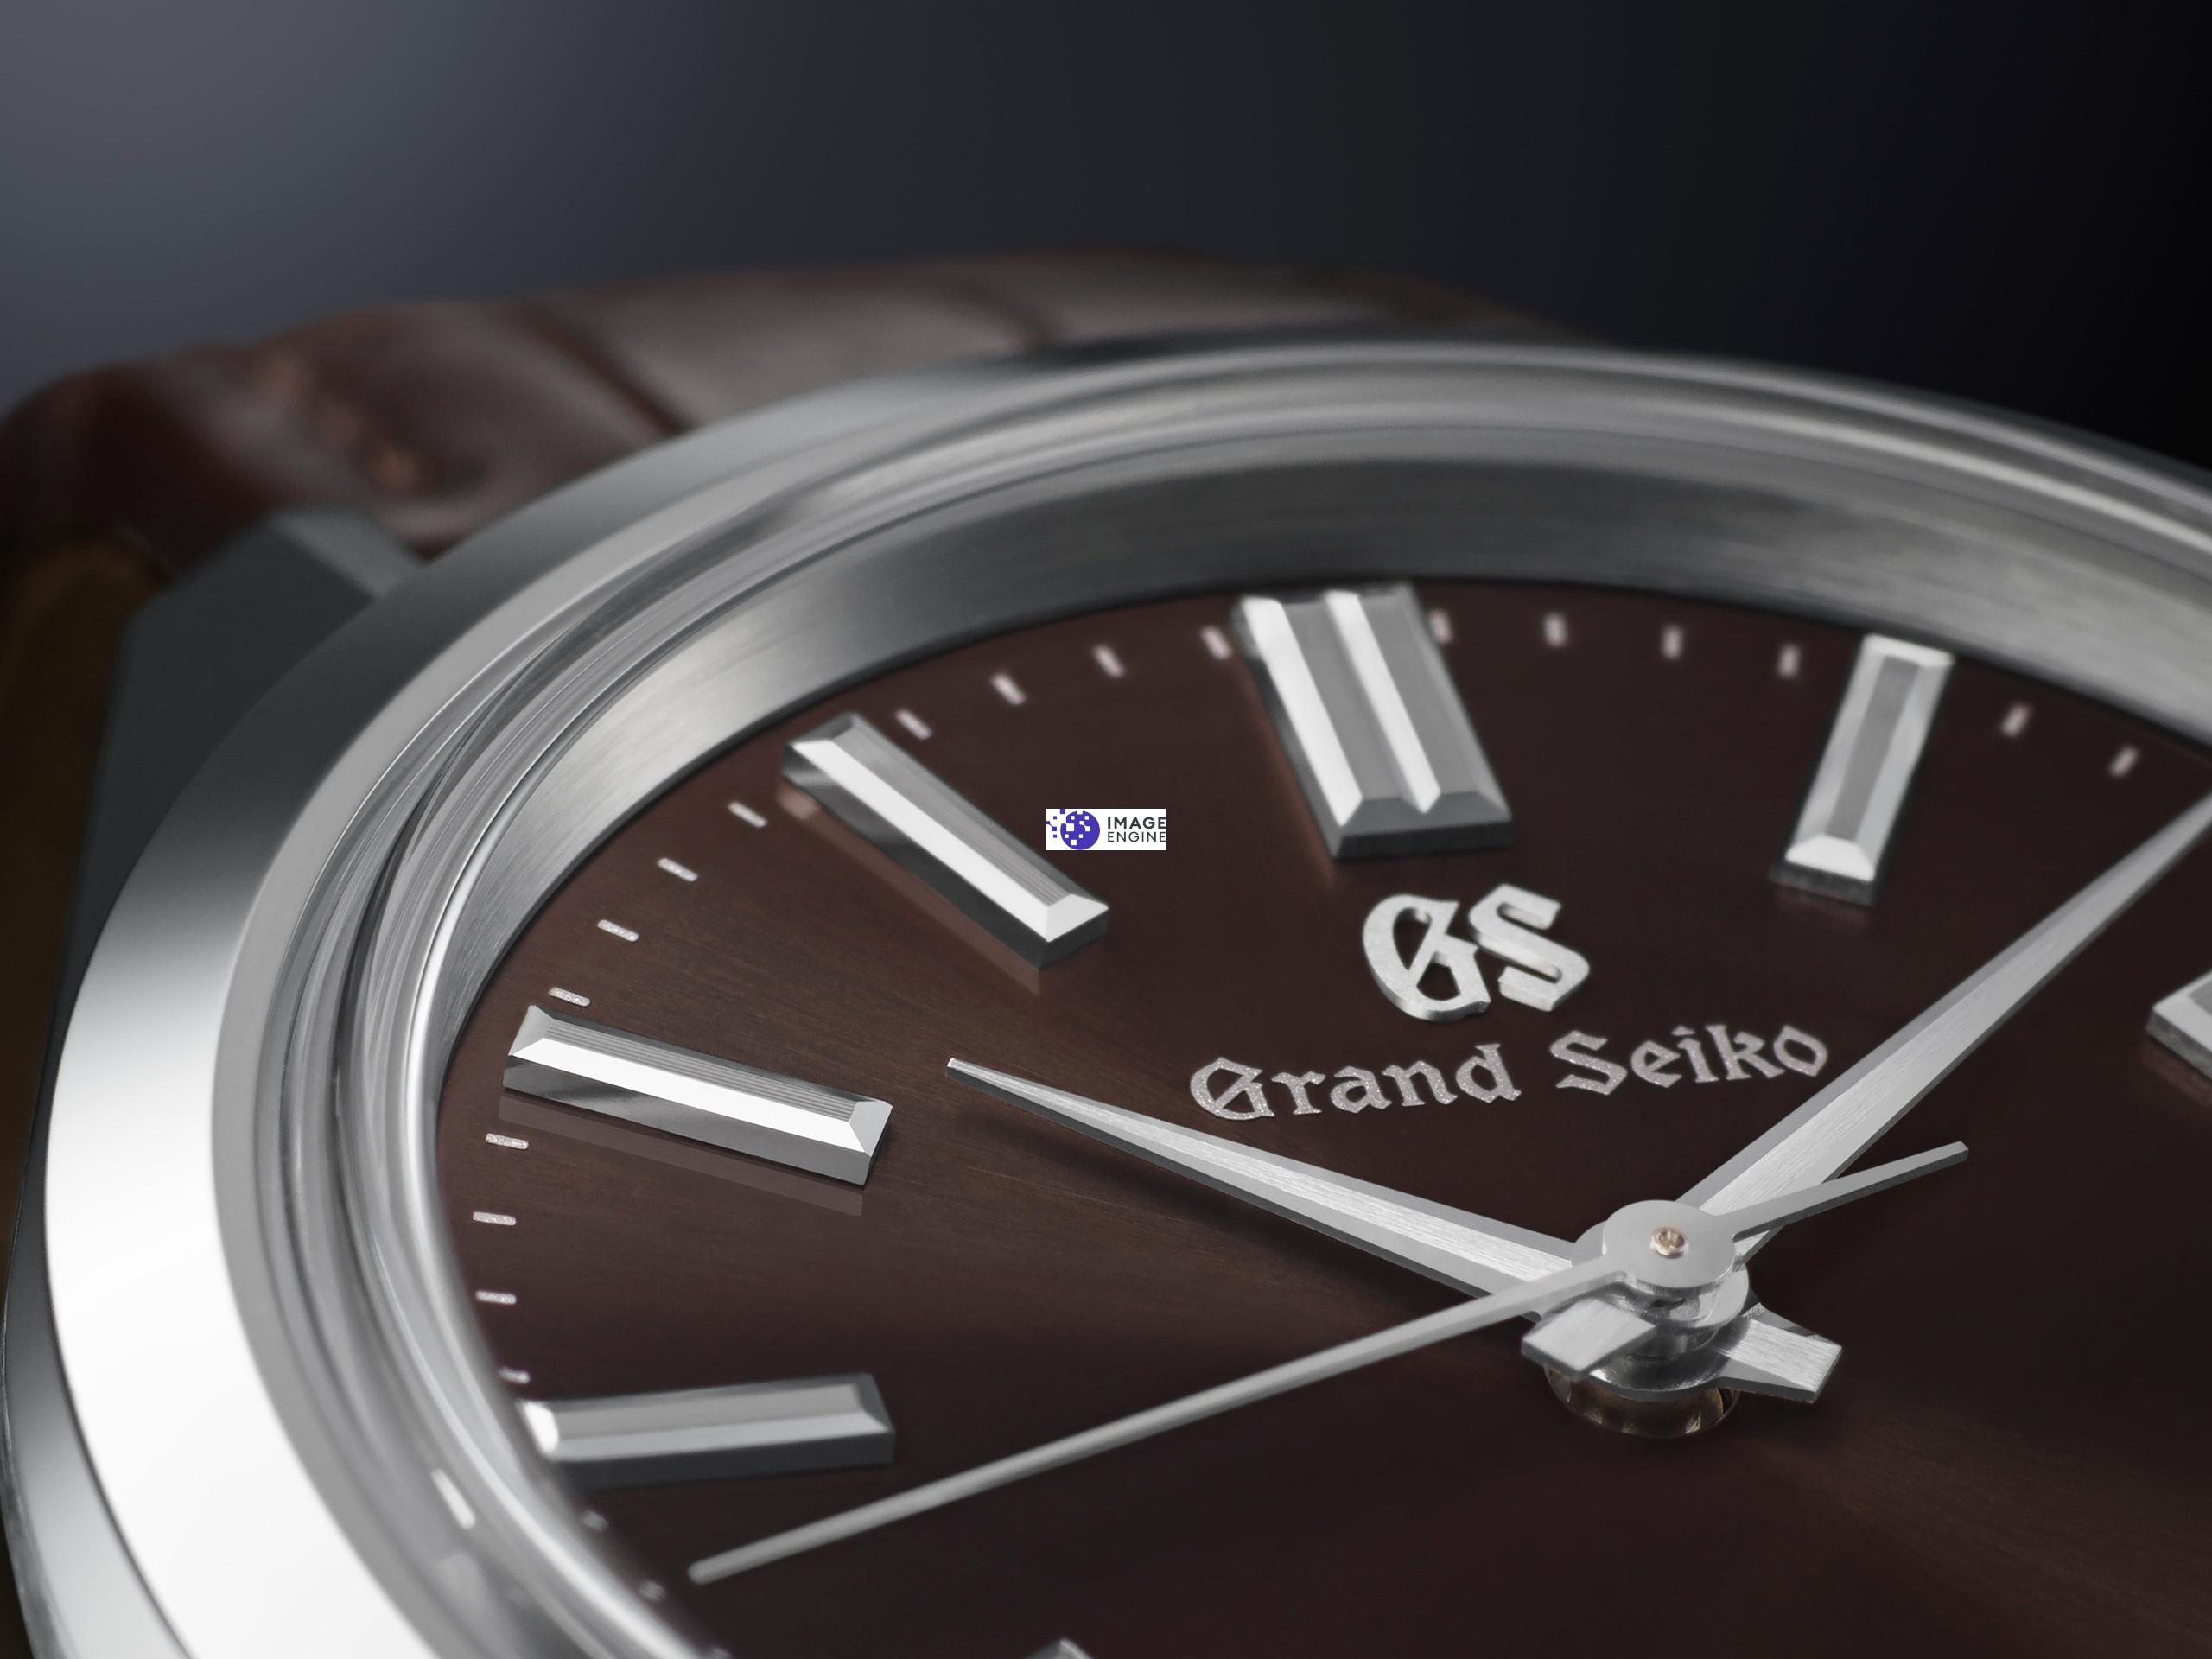 SBGW293 - Slim, 44GS with a Brown Sunray Pattern Dial – GRAND SEIKO INDIA